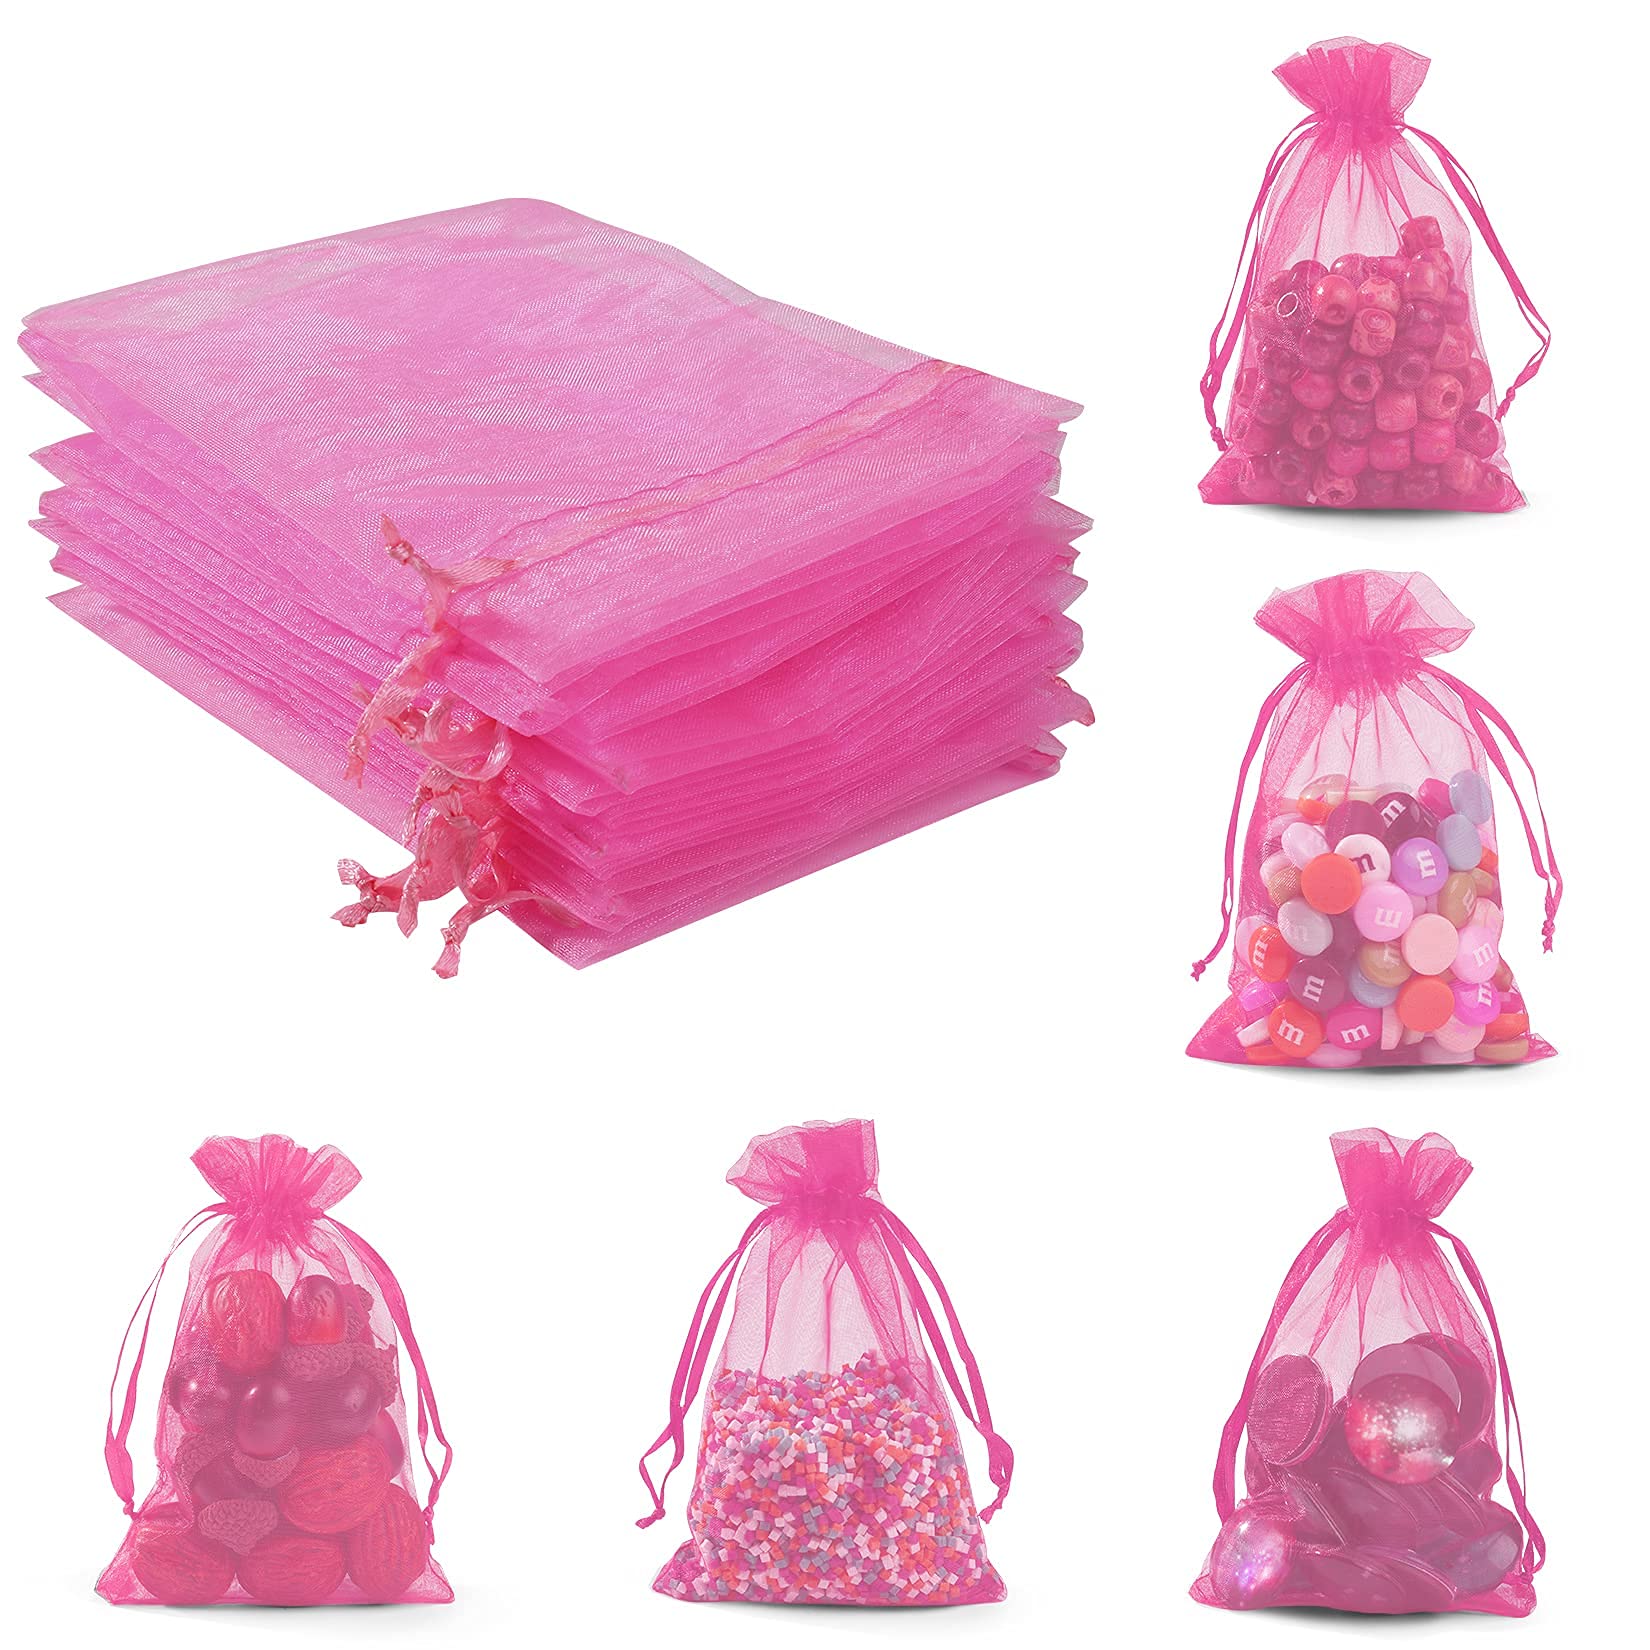 ANZNKU 50 Pack Organza Bags 4 x 6 inch Premium Sheer Drawstring Organza Bags for Candy Jewelry Party Wedding Christmas Favor Gif